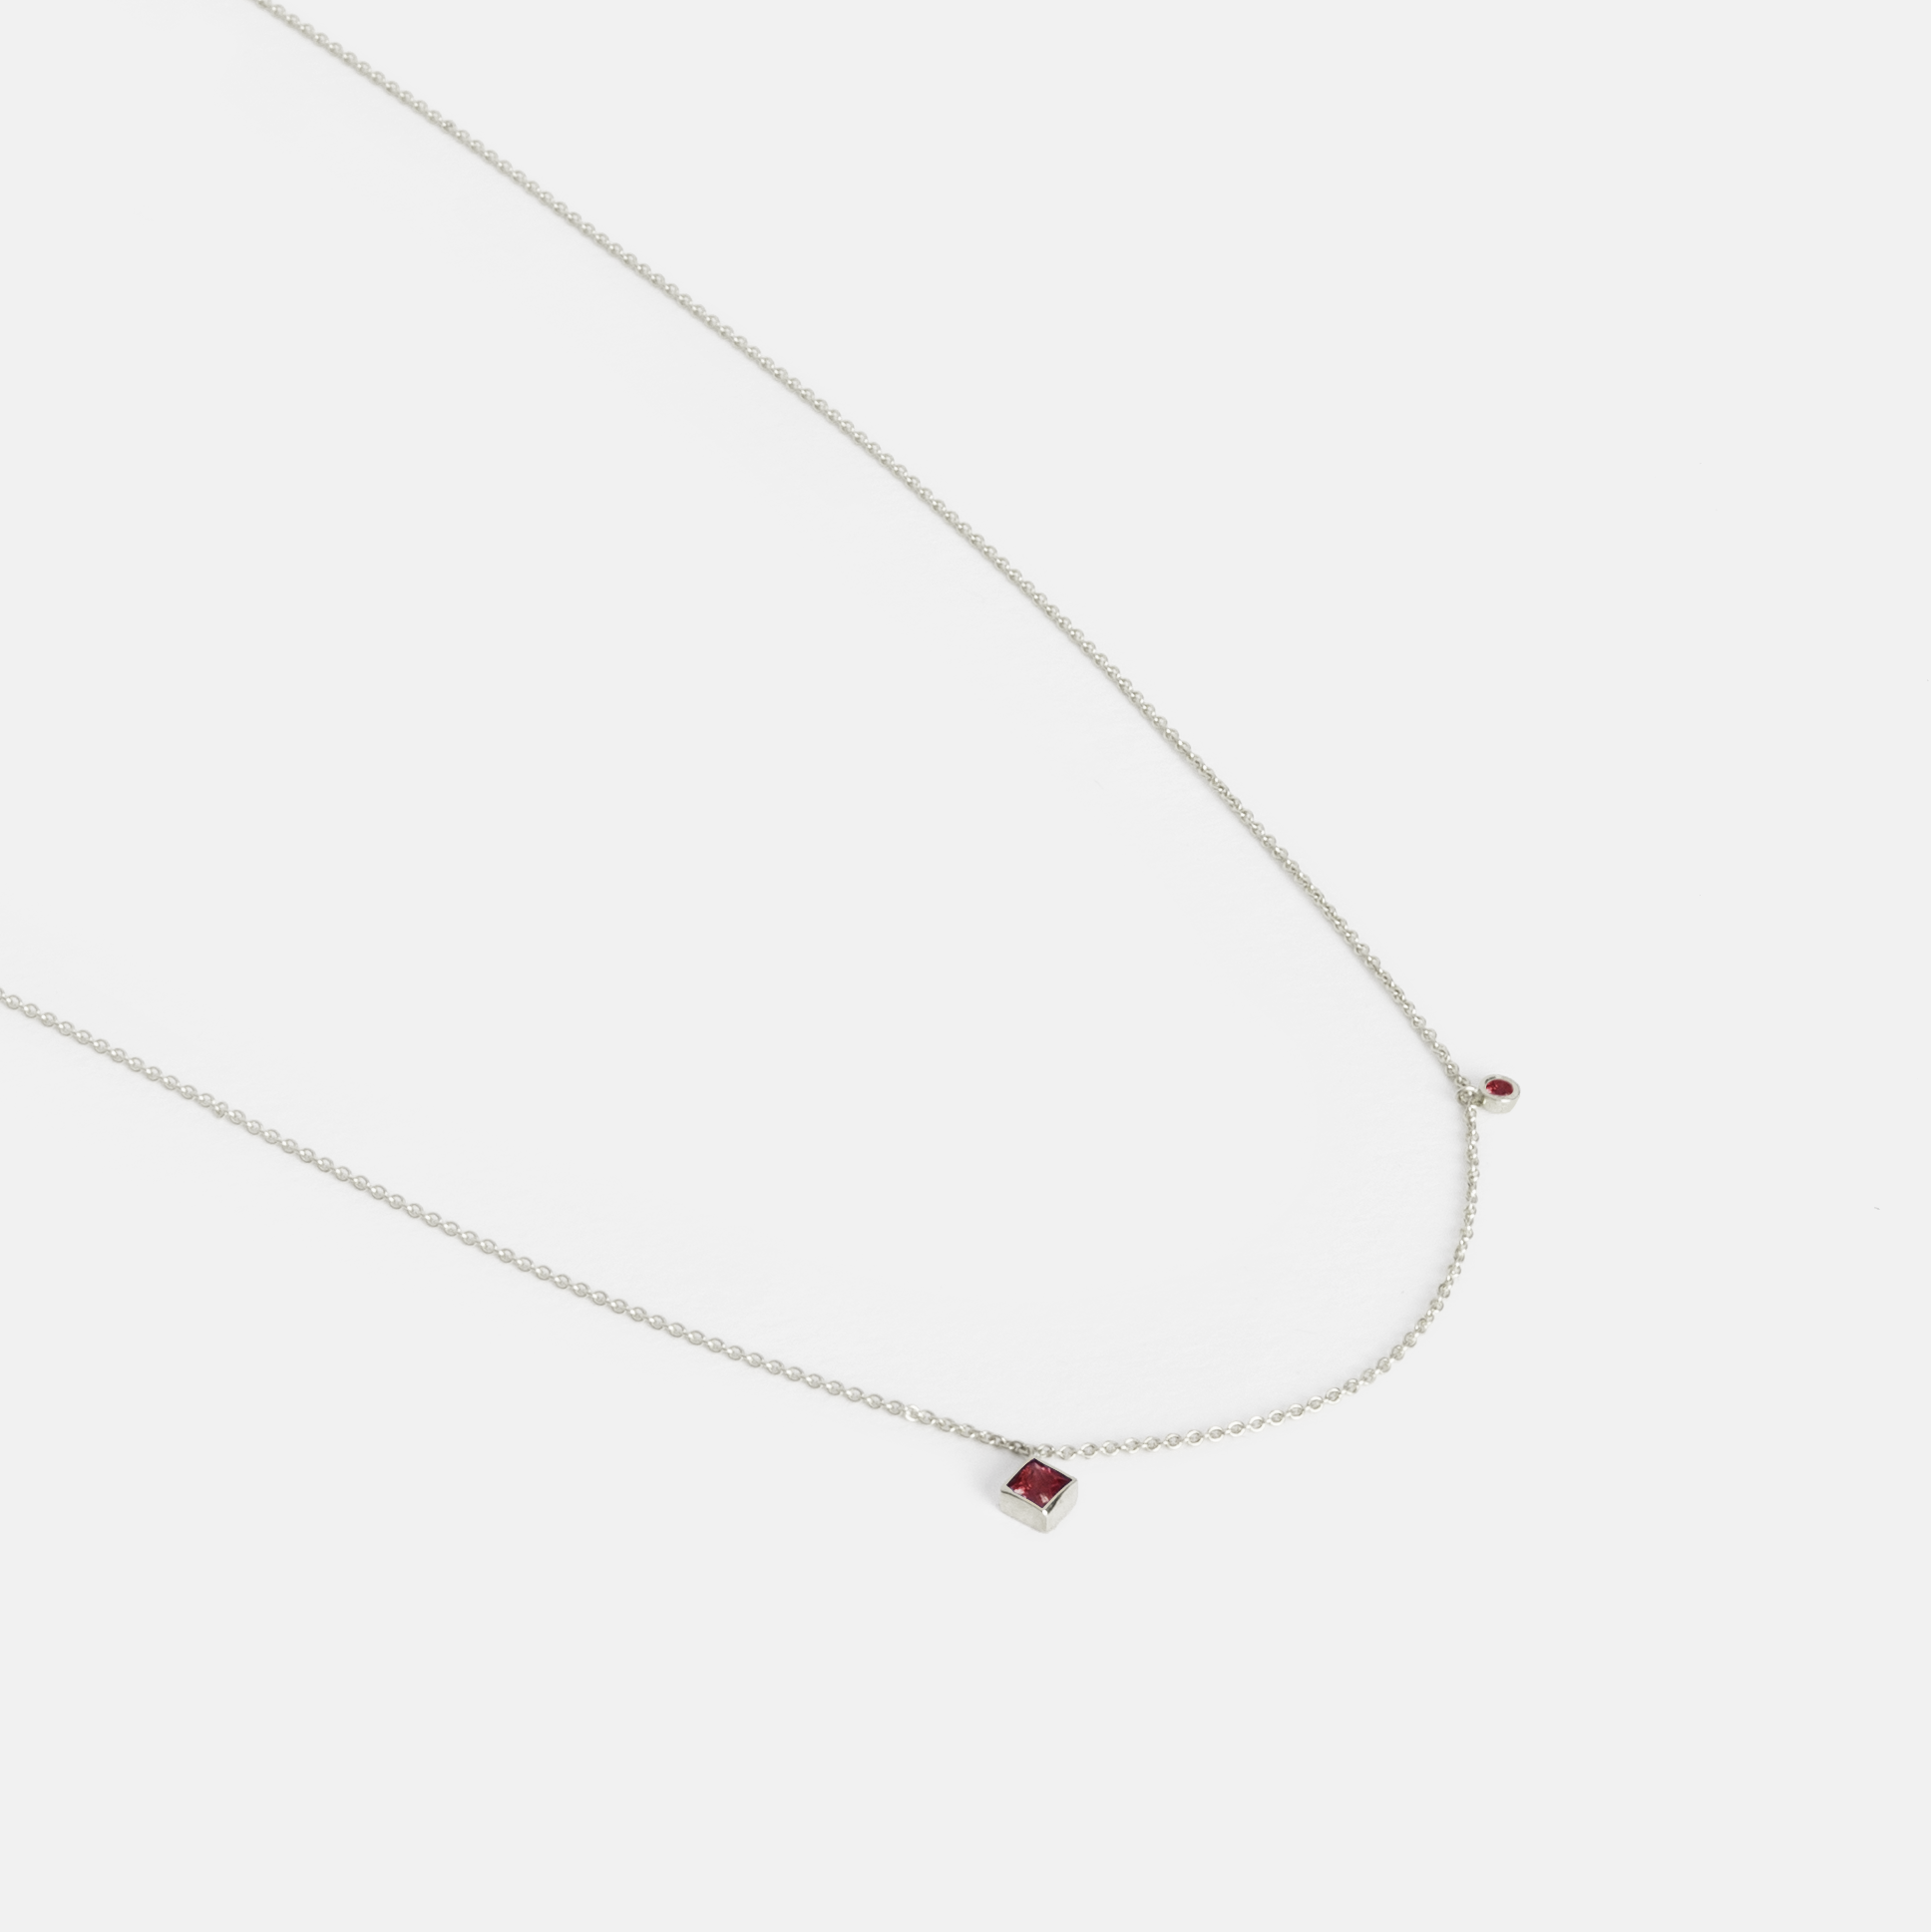  Ibi Thin Necklace in 14k White Gold set with Rubies By SHW Fine Jewelry NYC